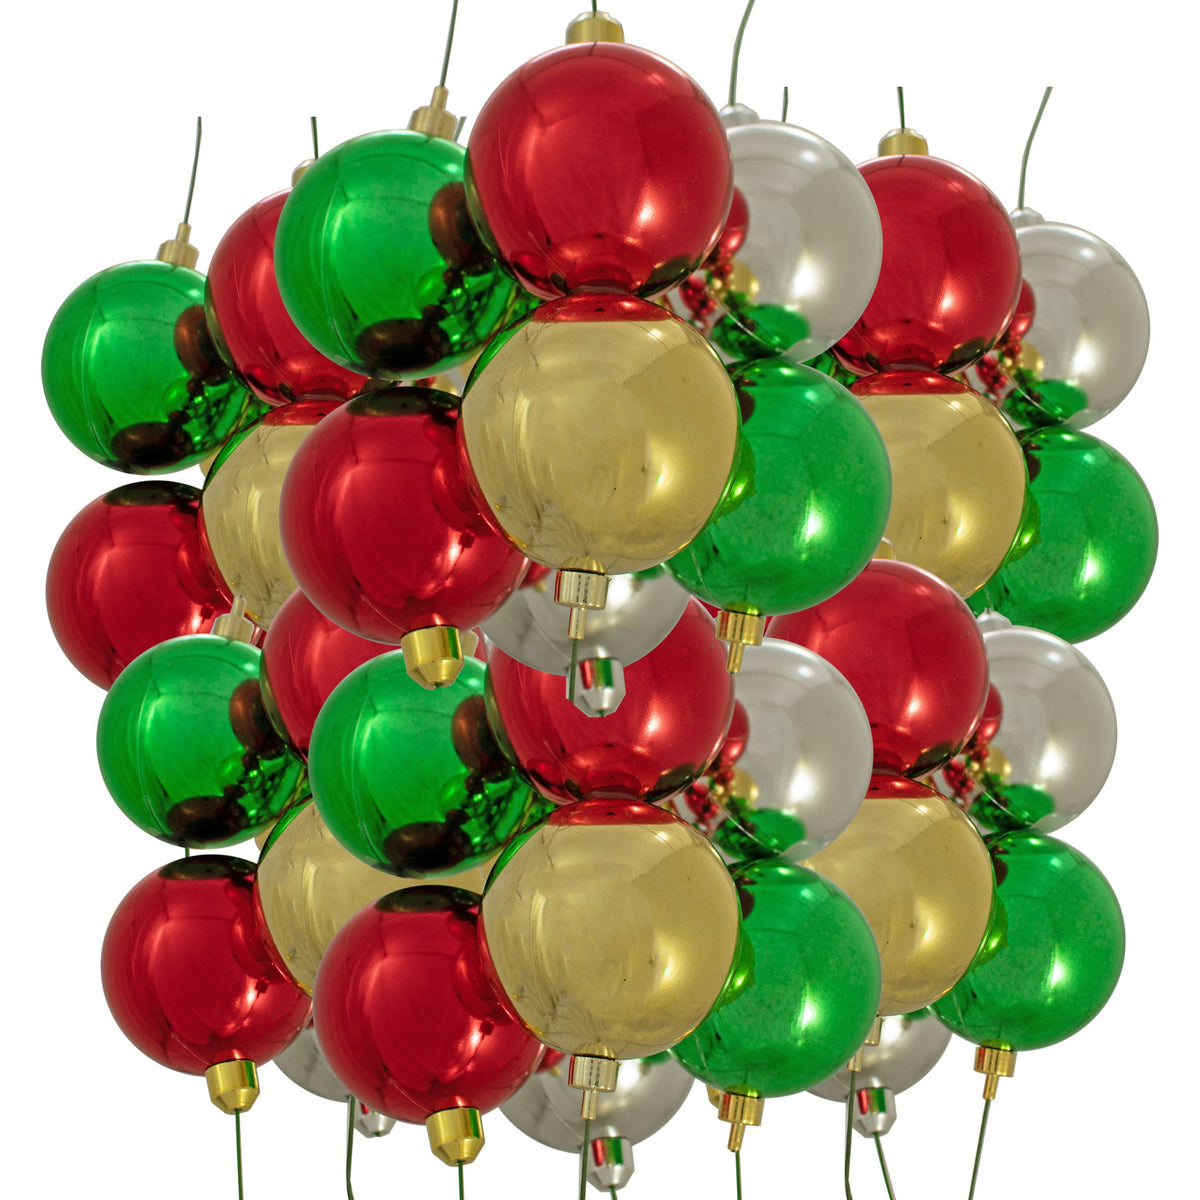 Get a bundle of Multi-Color Ball Ornaments from Lee Display in Classic Christmas colors of Red, Green, Silver, and Gold.